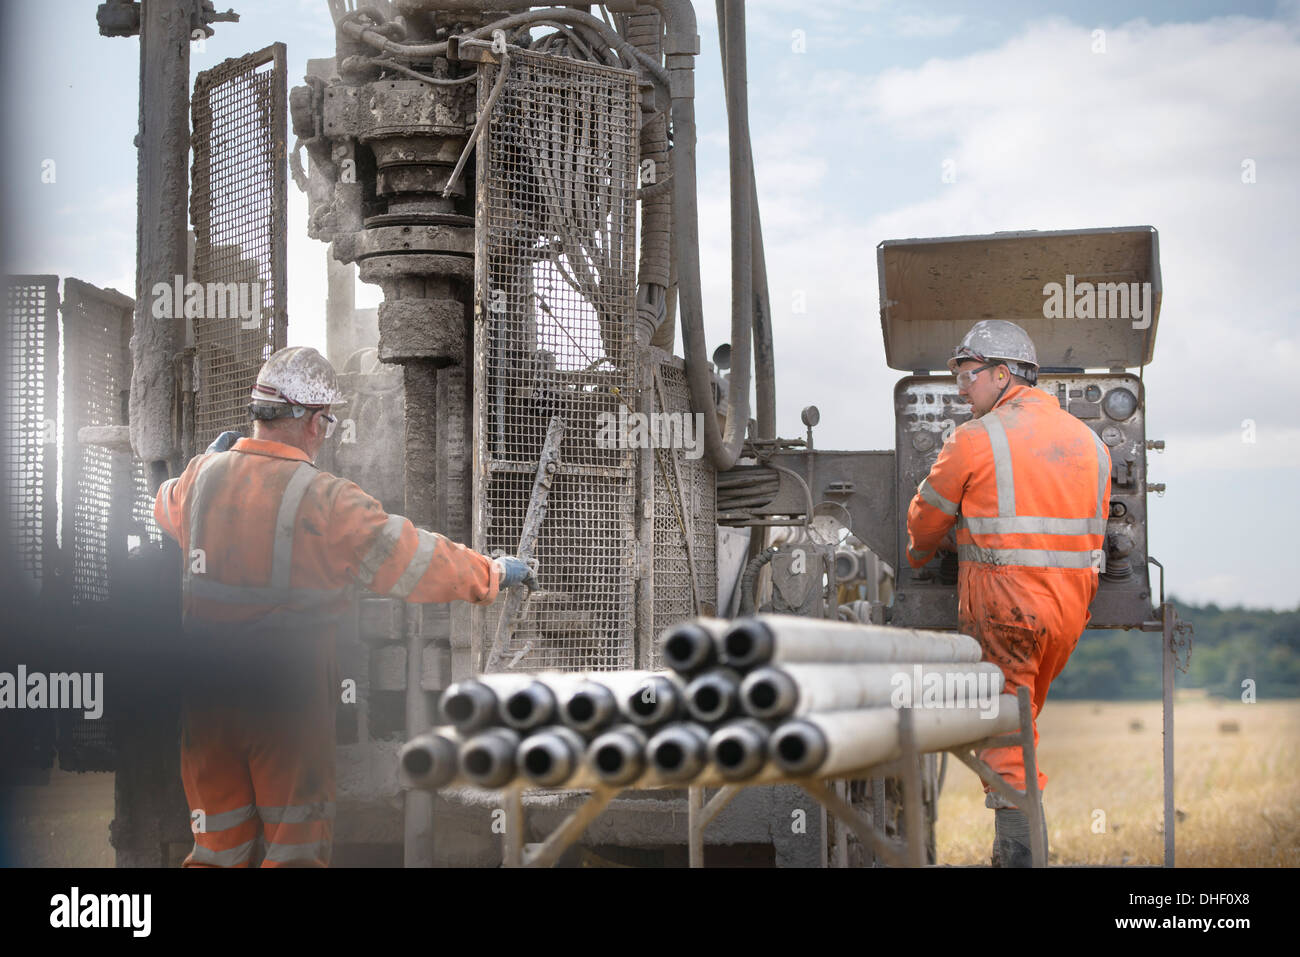 Drilling rig workers operating machinery Stock Photo